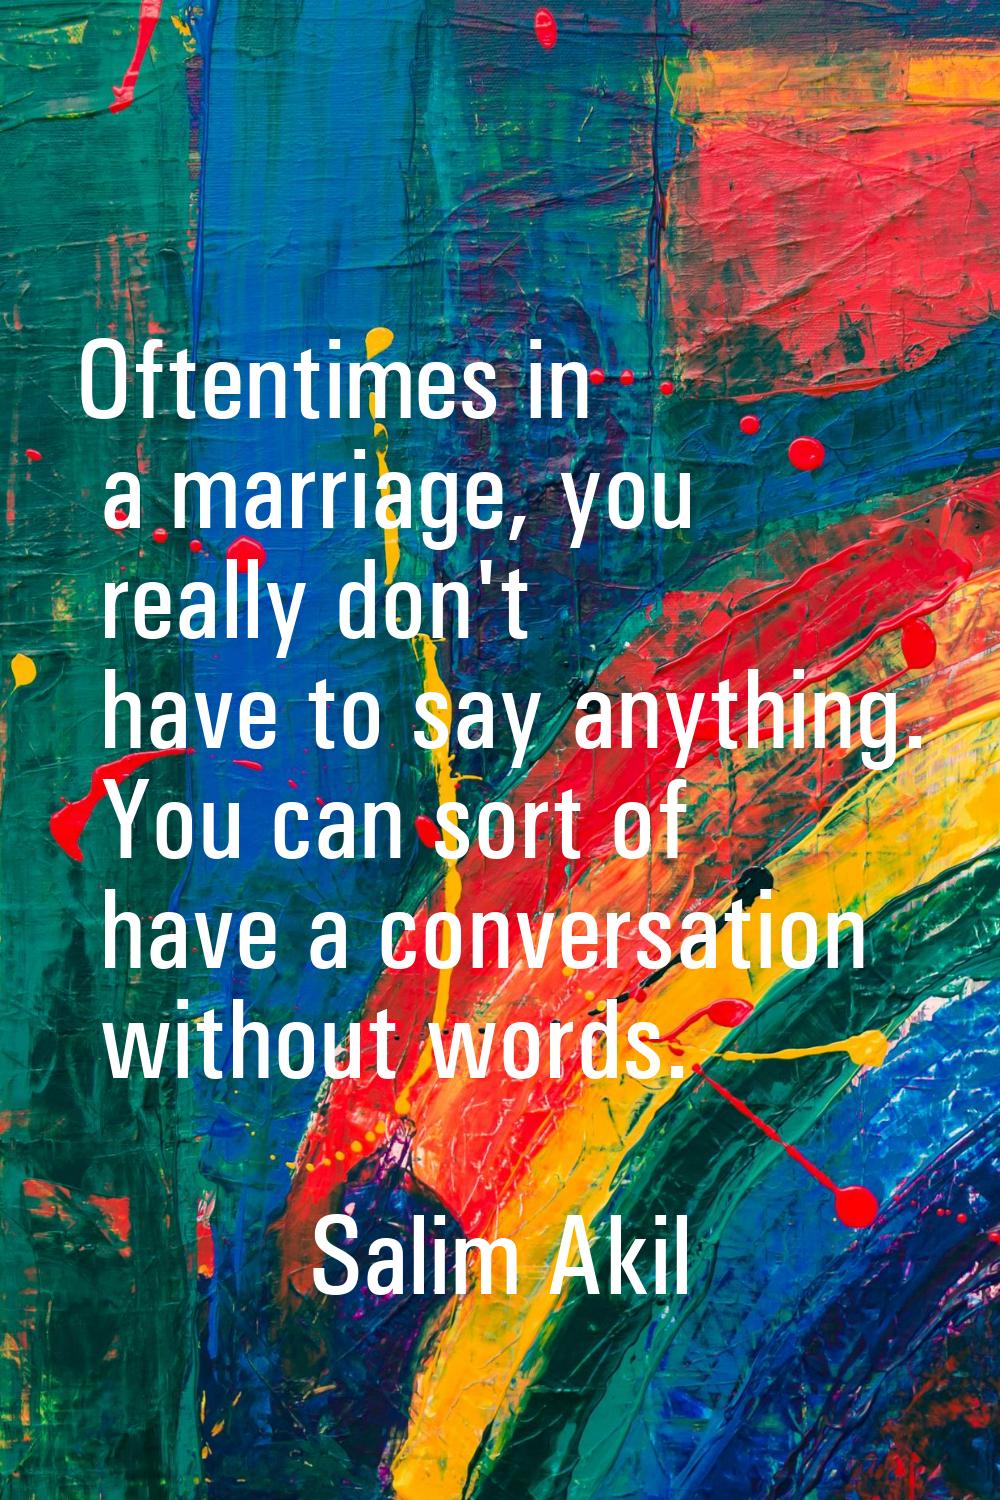 Oftentimes in a marriage, you really don't have to say anything. You can sort of have a conversatio